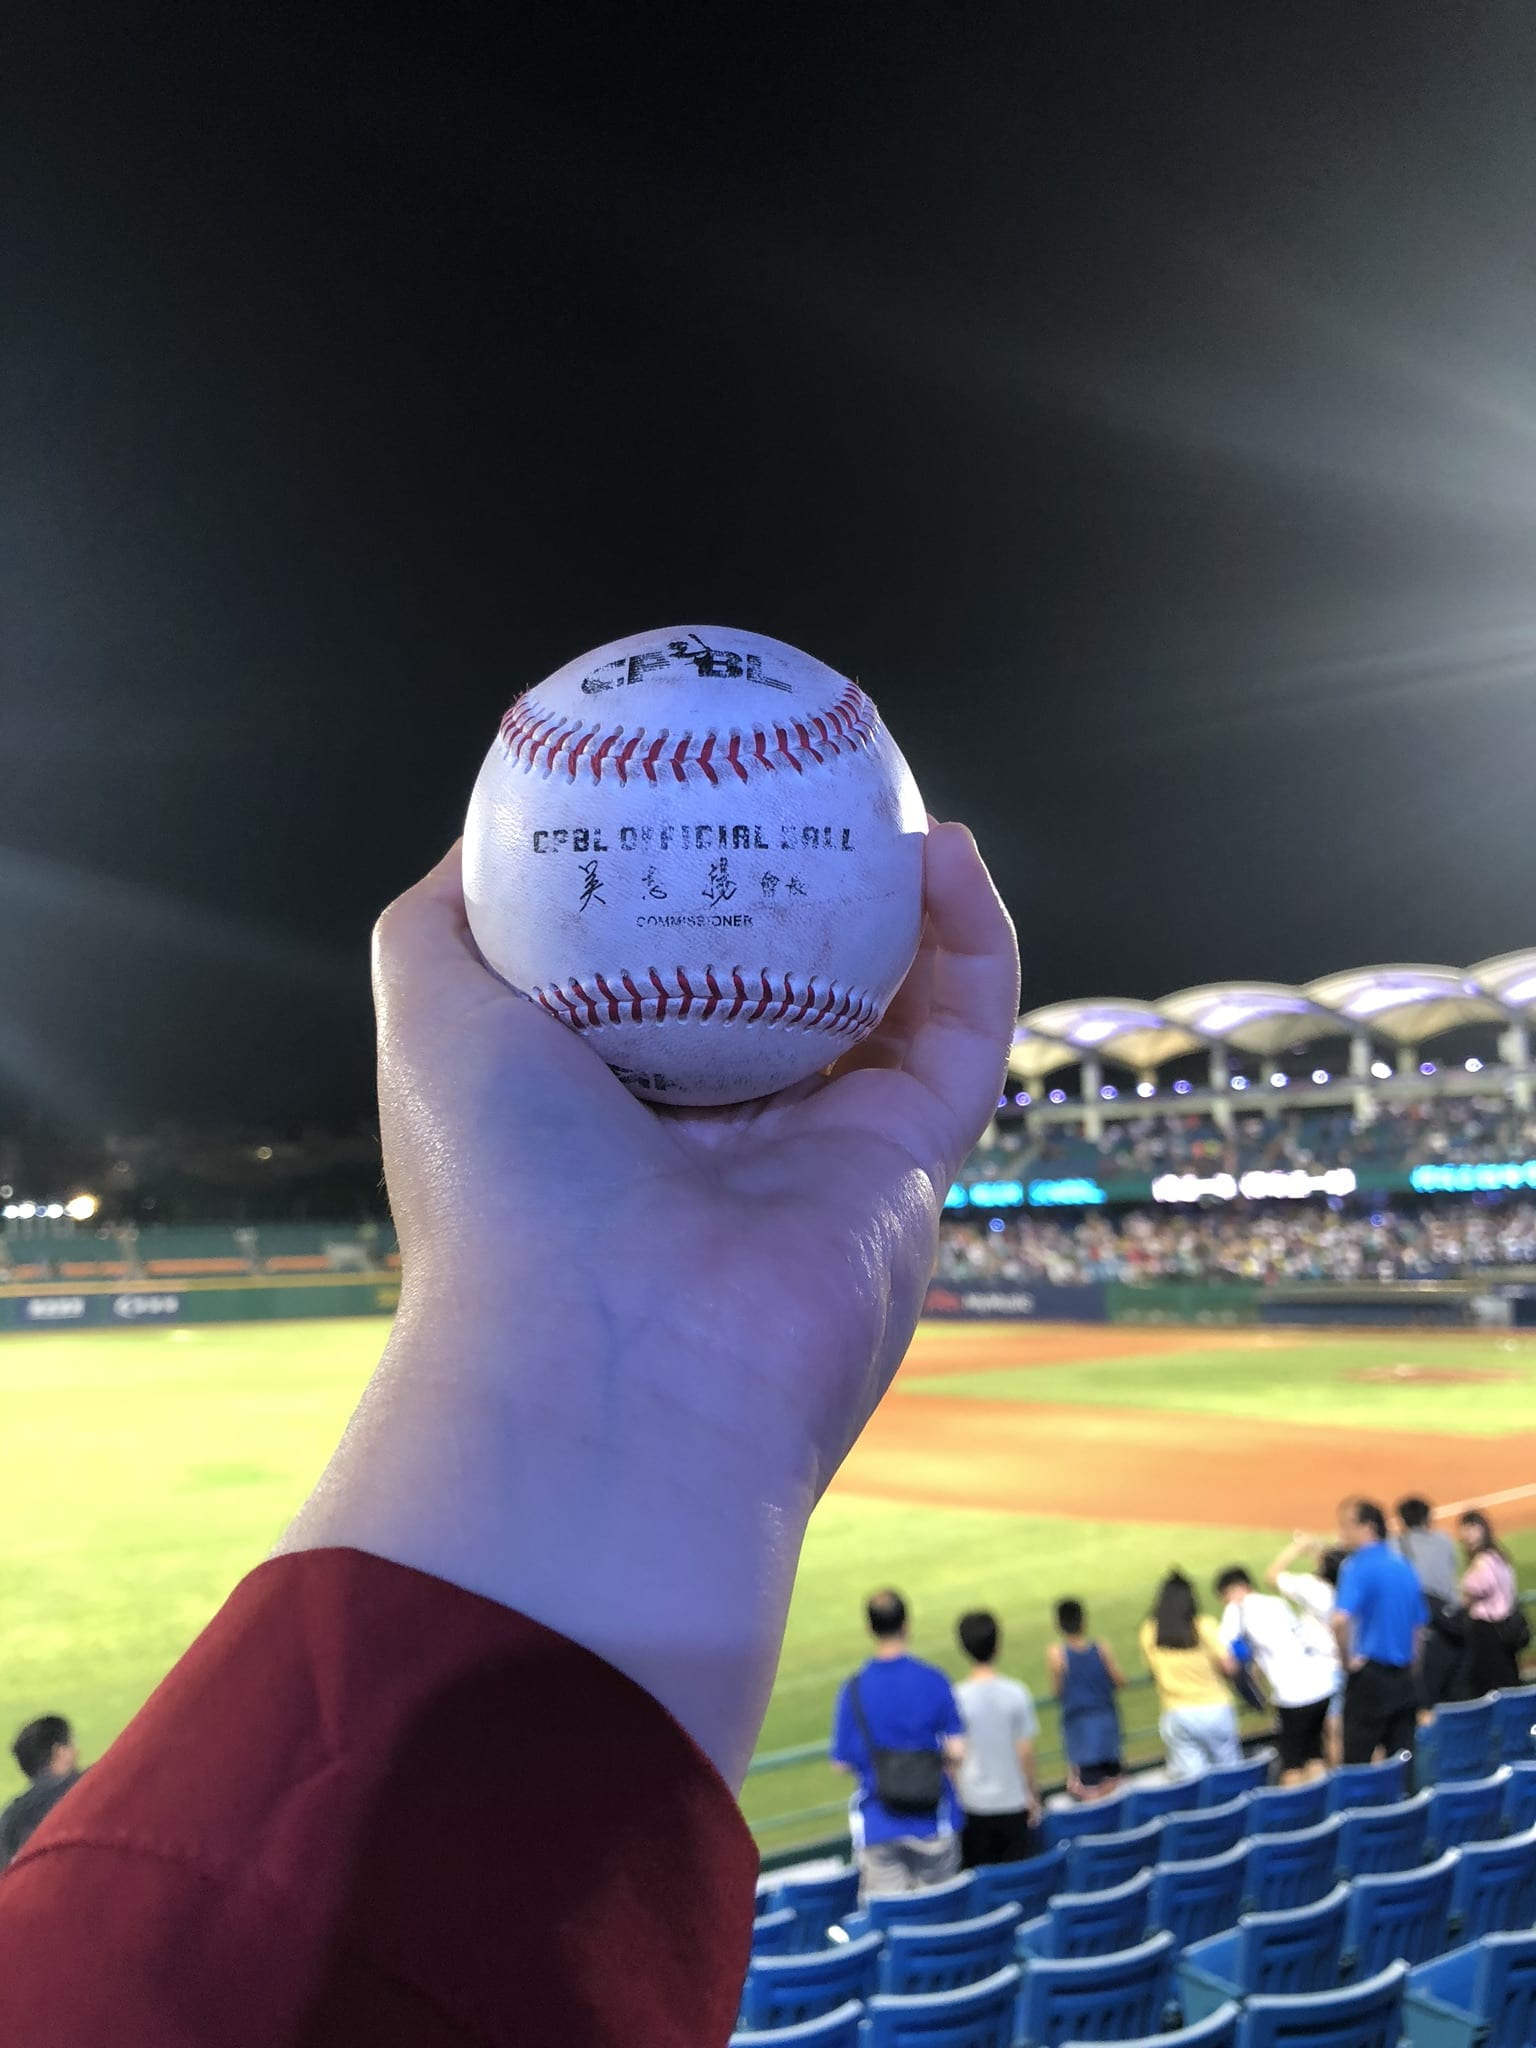 person holding a baseball in their hand overlooking a baseball stadium